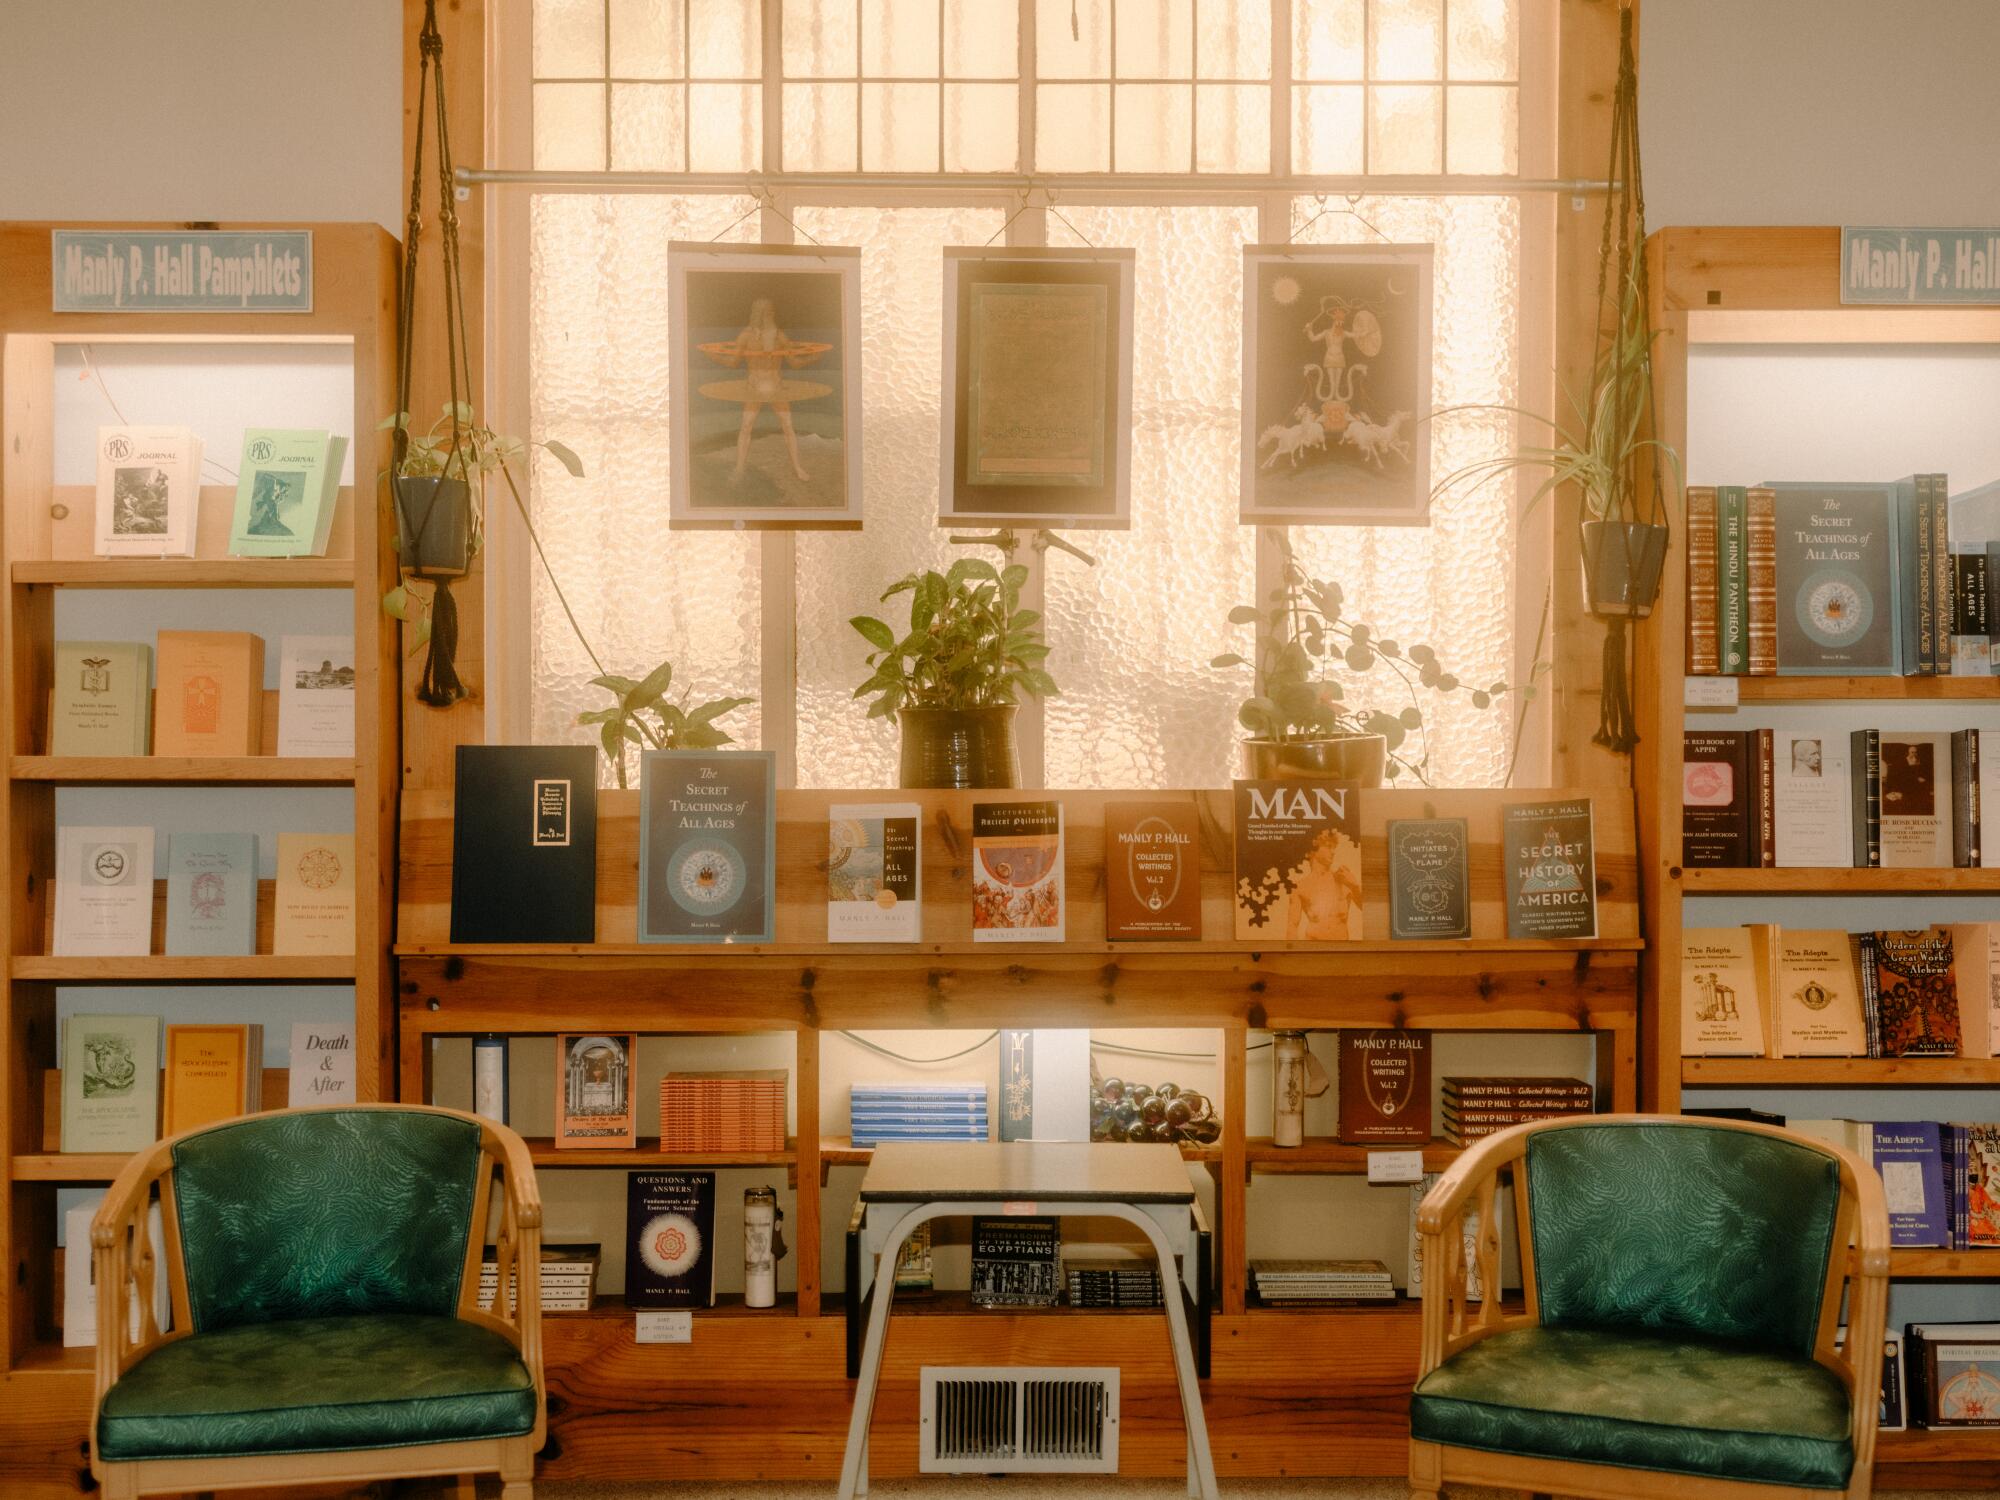 The Philosophical Research Society's bookstore includes this reading nook.